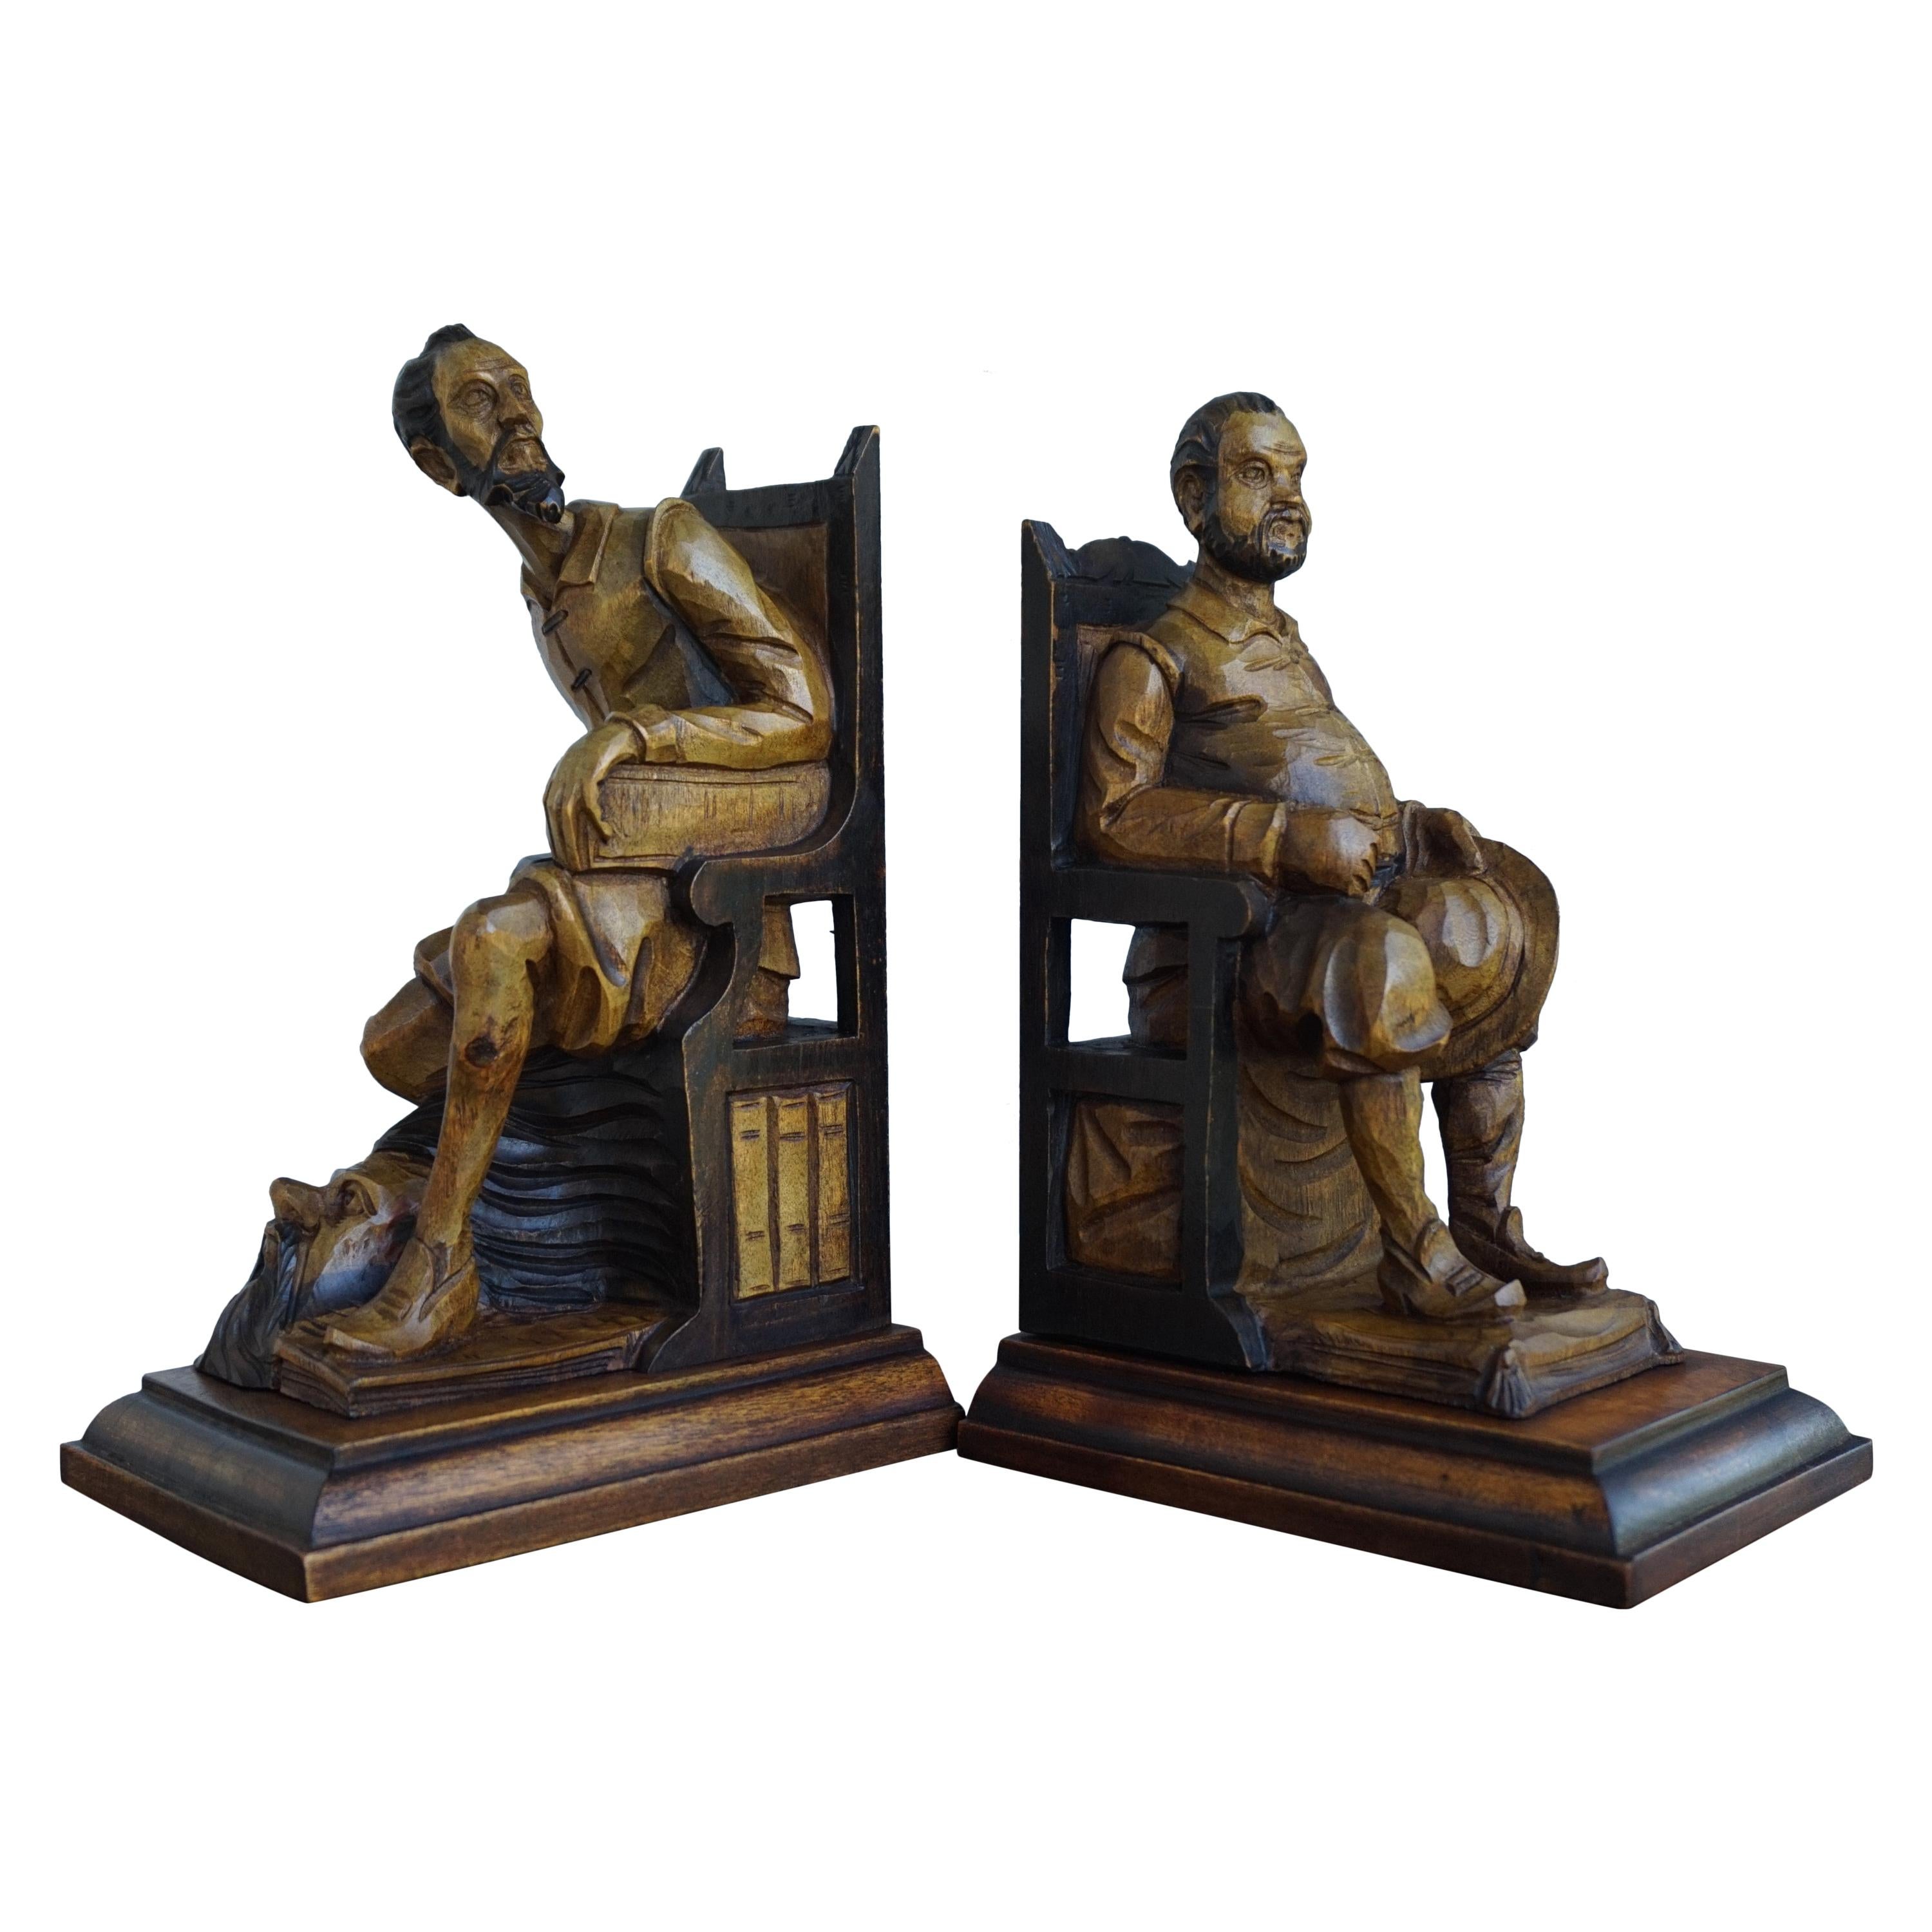 Good Size Pair of Hand Carved and Ebonized Don Quixote and Sancho Panza Bookends